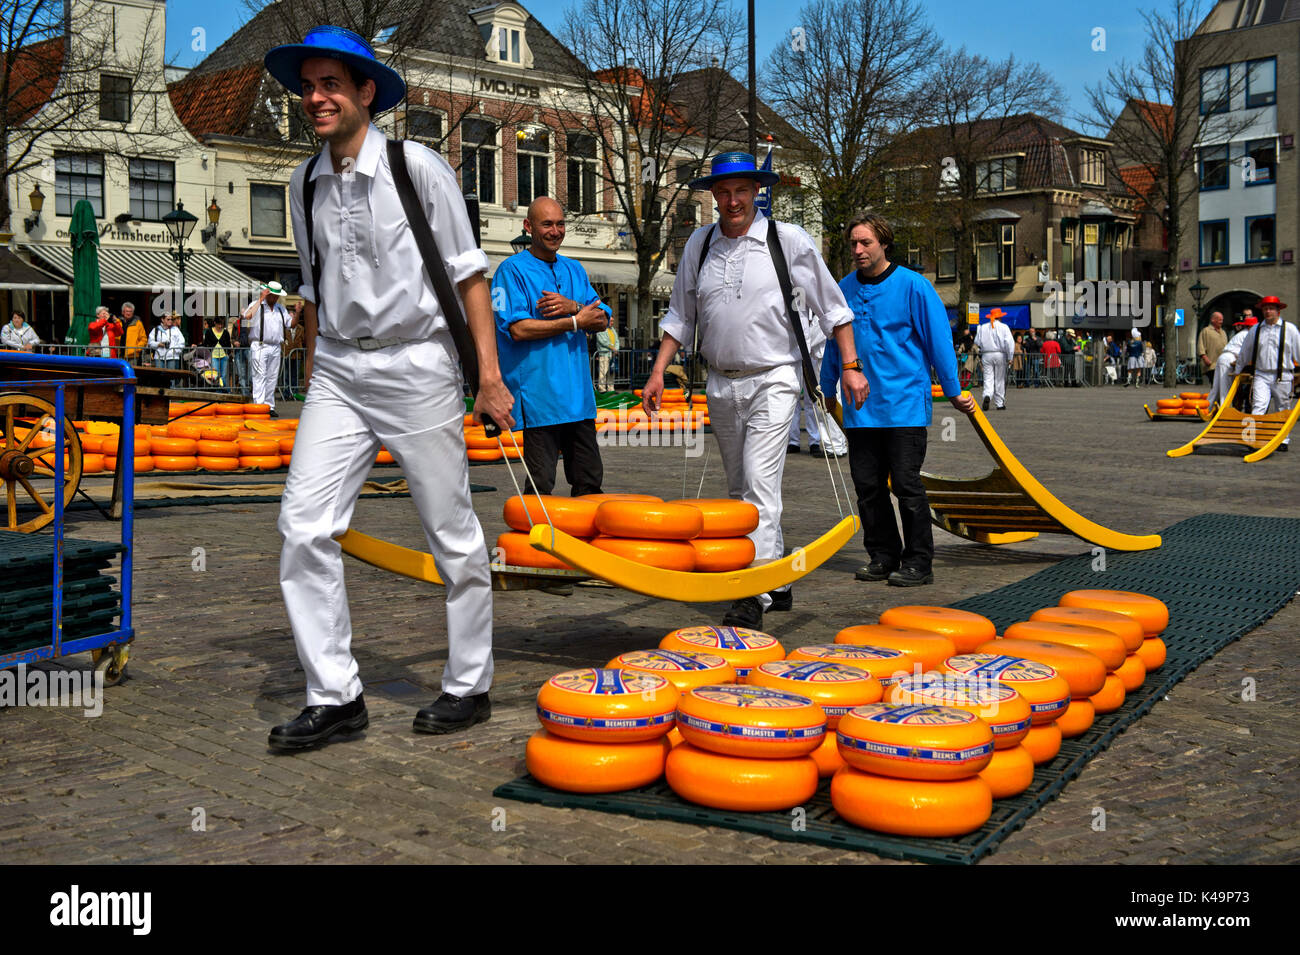 Cheese Carriers Carrying Cheese Truckles On A Wooden Stretcher At The Cheese Market Of Alkmaar, Netherlands Stock Photo